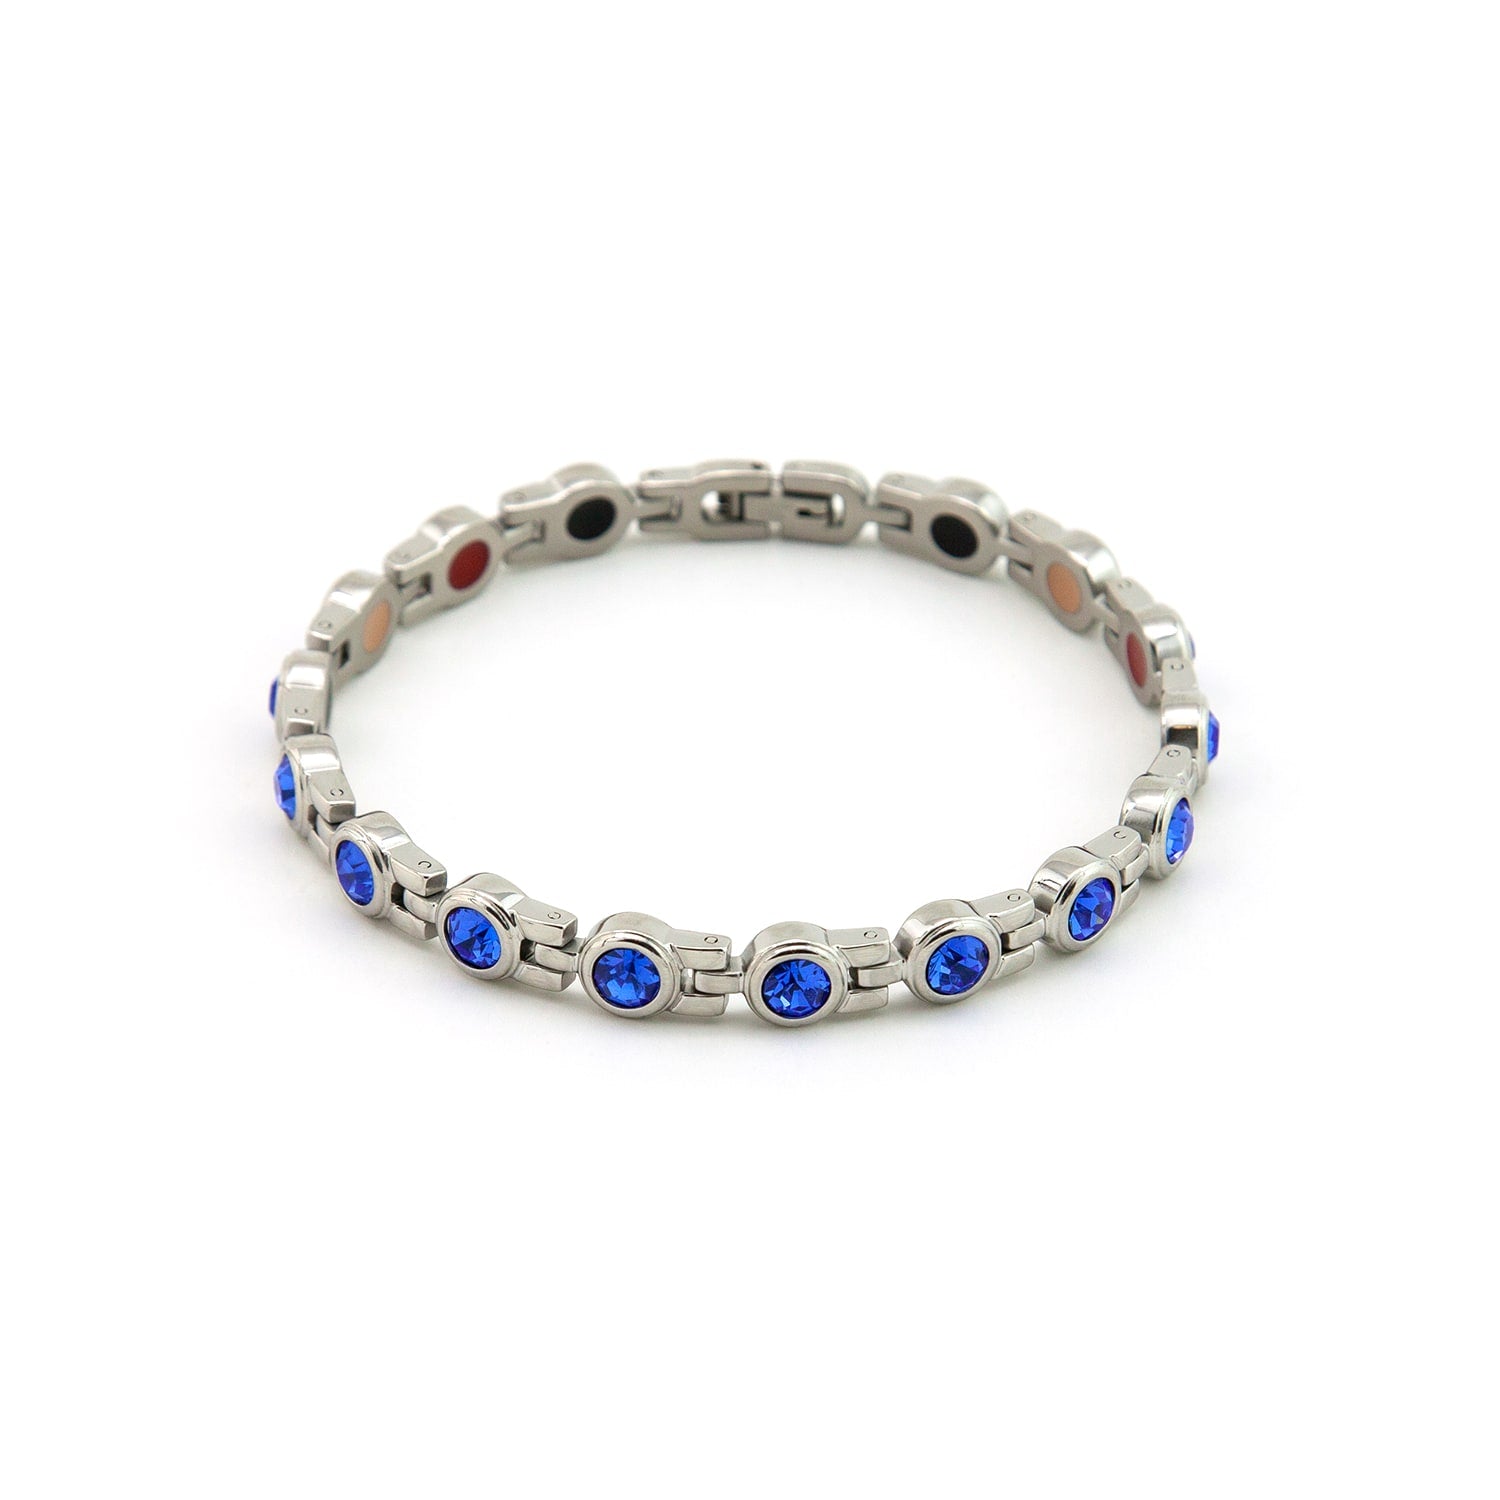 Capri - Negative Ion Bracelet, Polished Stainless Steel with Blue Crystals